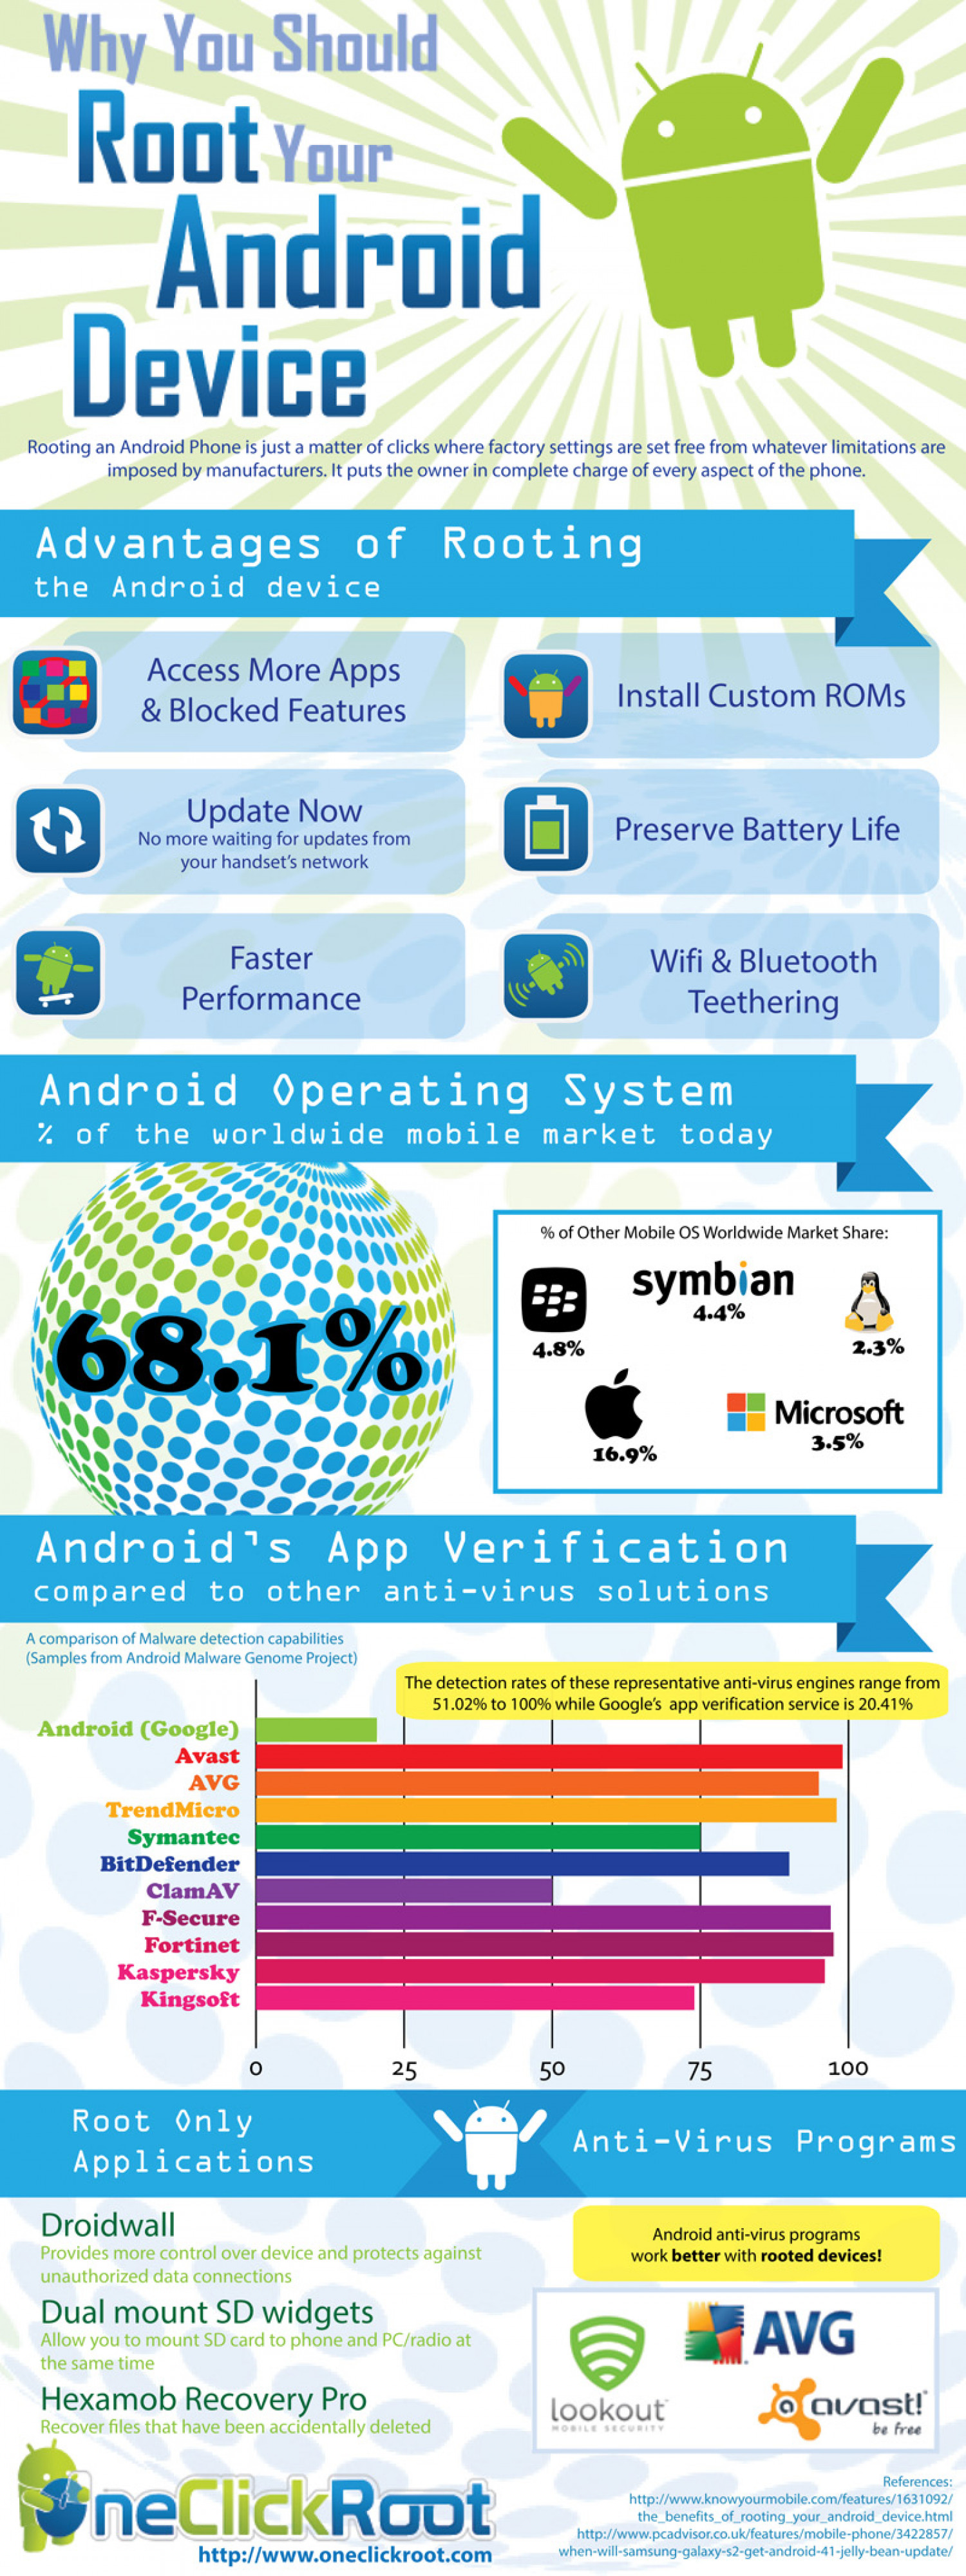 Why You Should Root Your Android Device Infographic